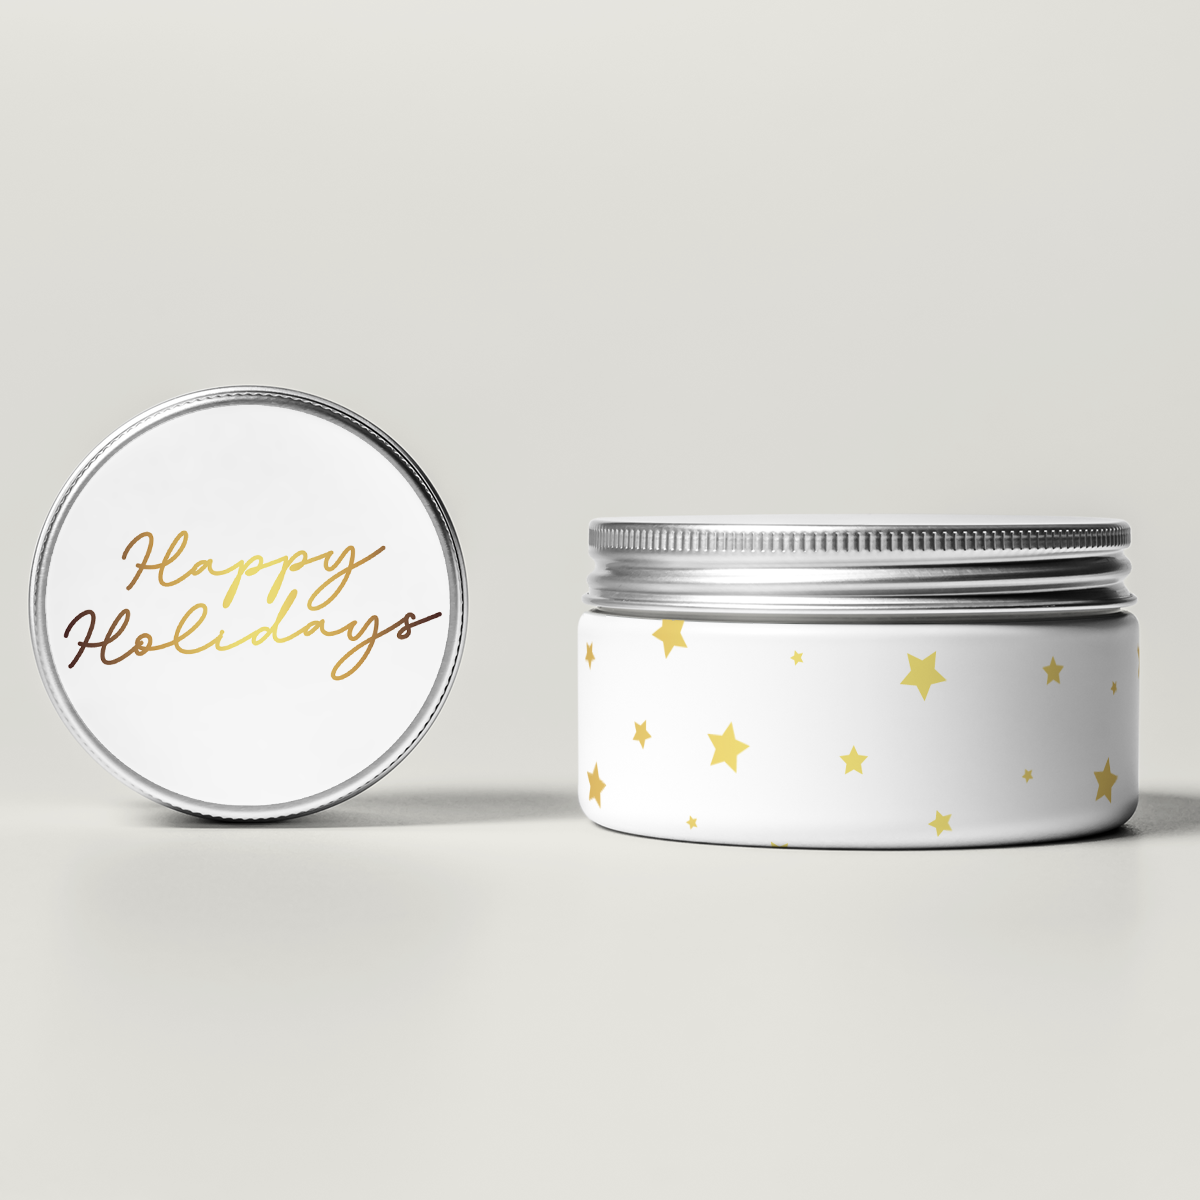 MATTE/GLOSS The Jewel Christmas Collection - Happy Holidays Stars Travel Tin Set (Lid and Wrap Label) Monochrome